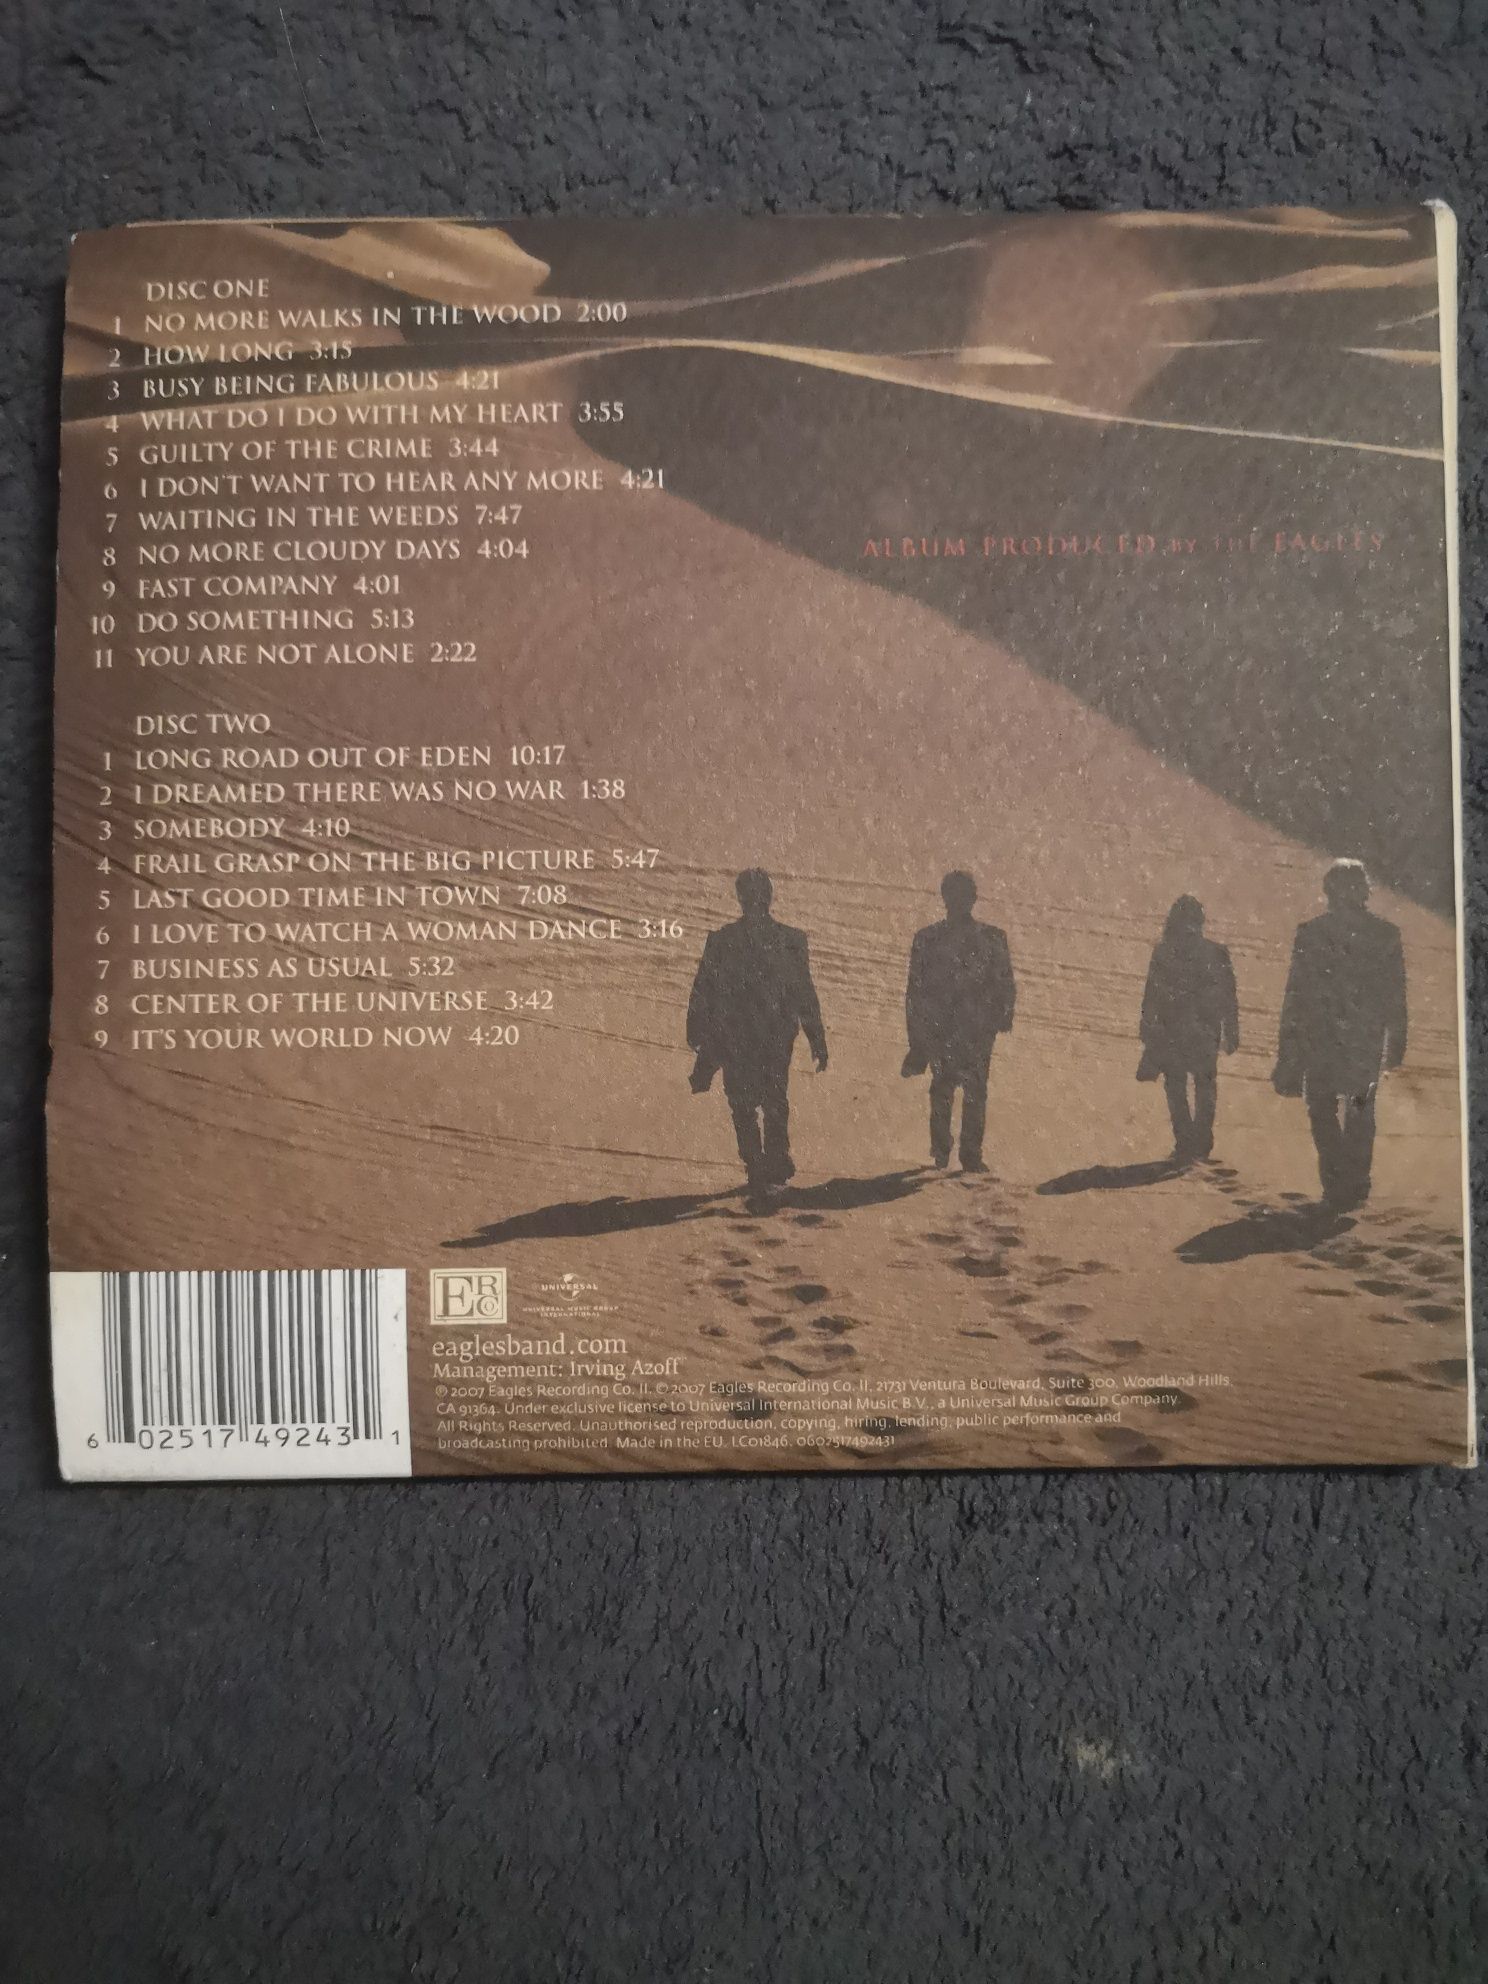 Eagles Long Road Out Eden 2 płyty cd